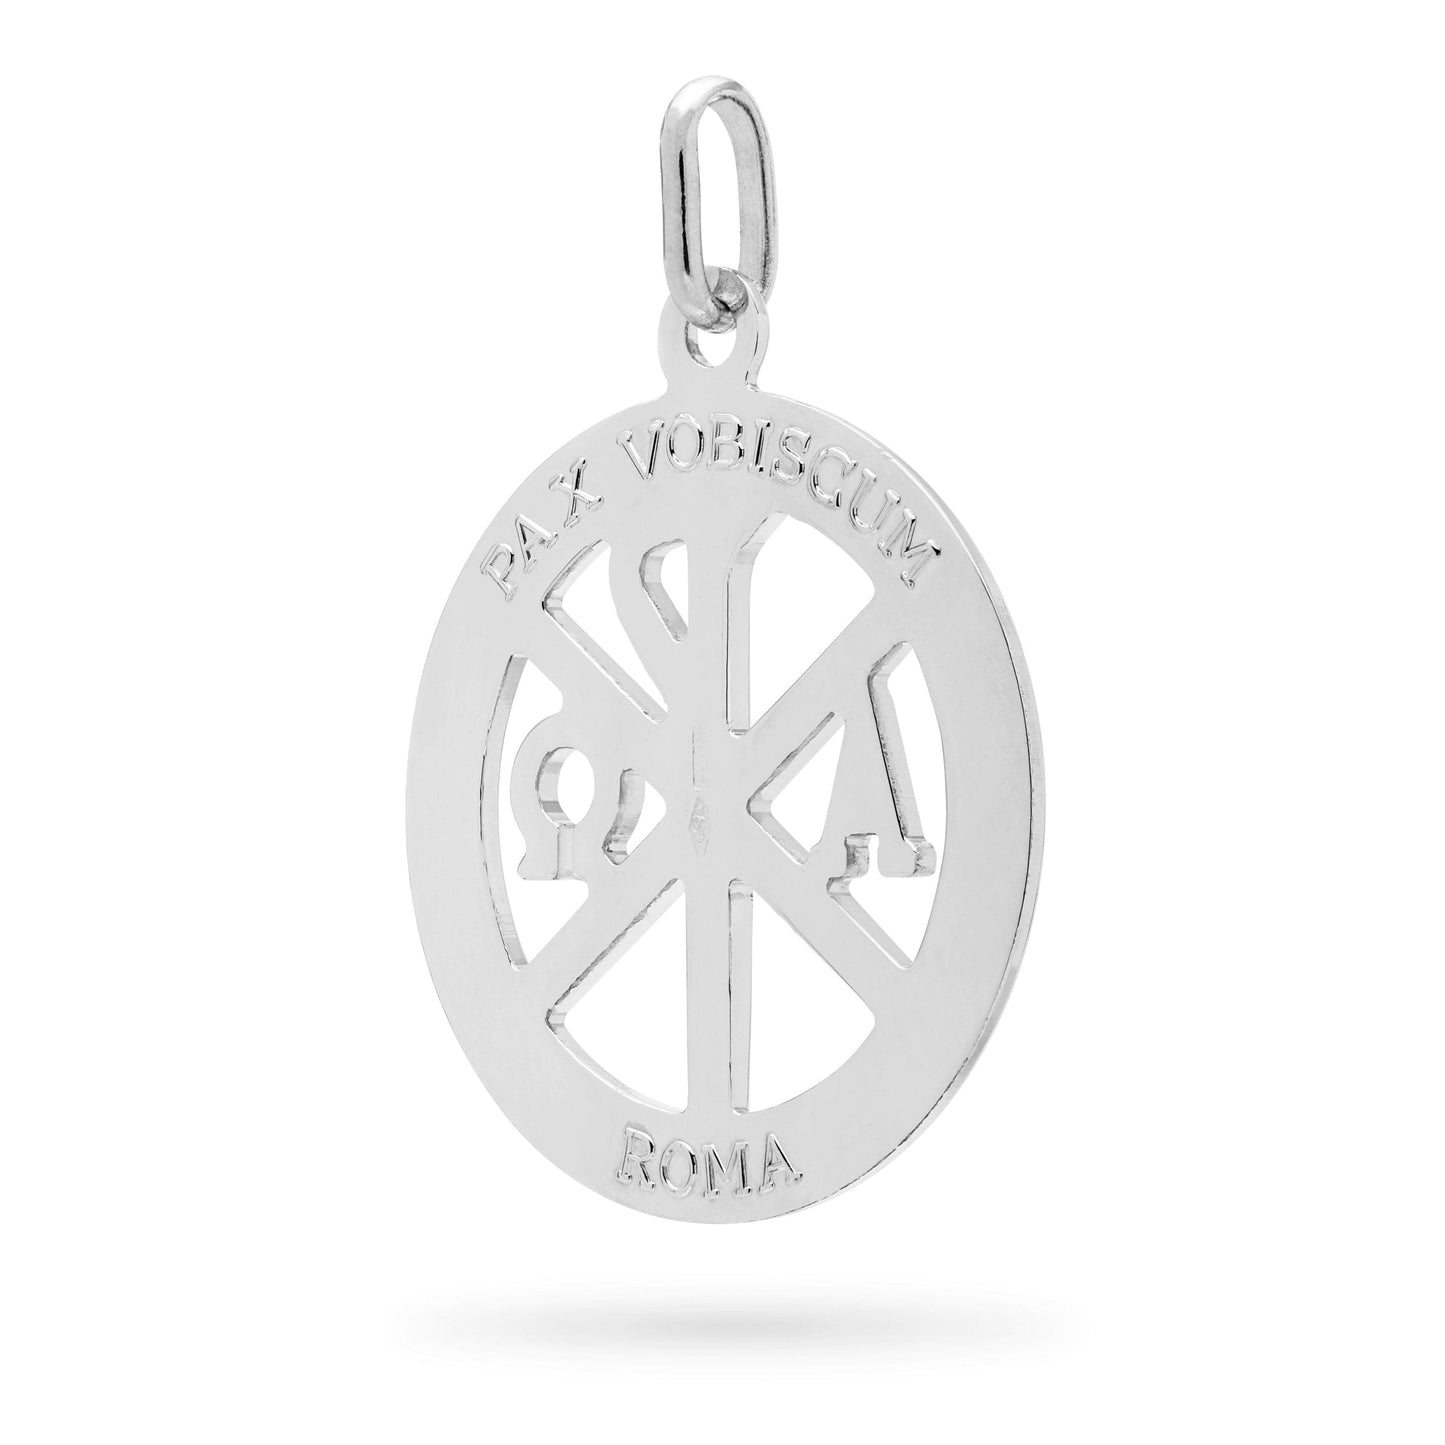 MONDO CATTOLICO Medal Sterling Silver Peace Cross Medal